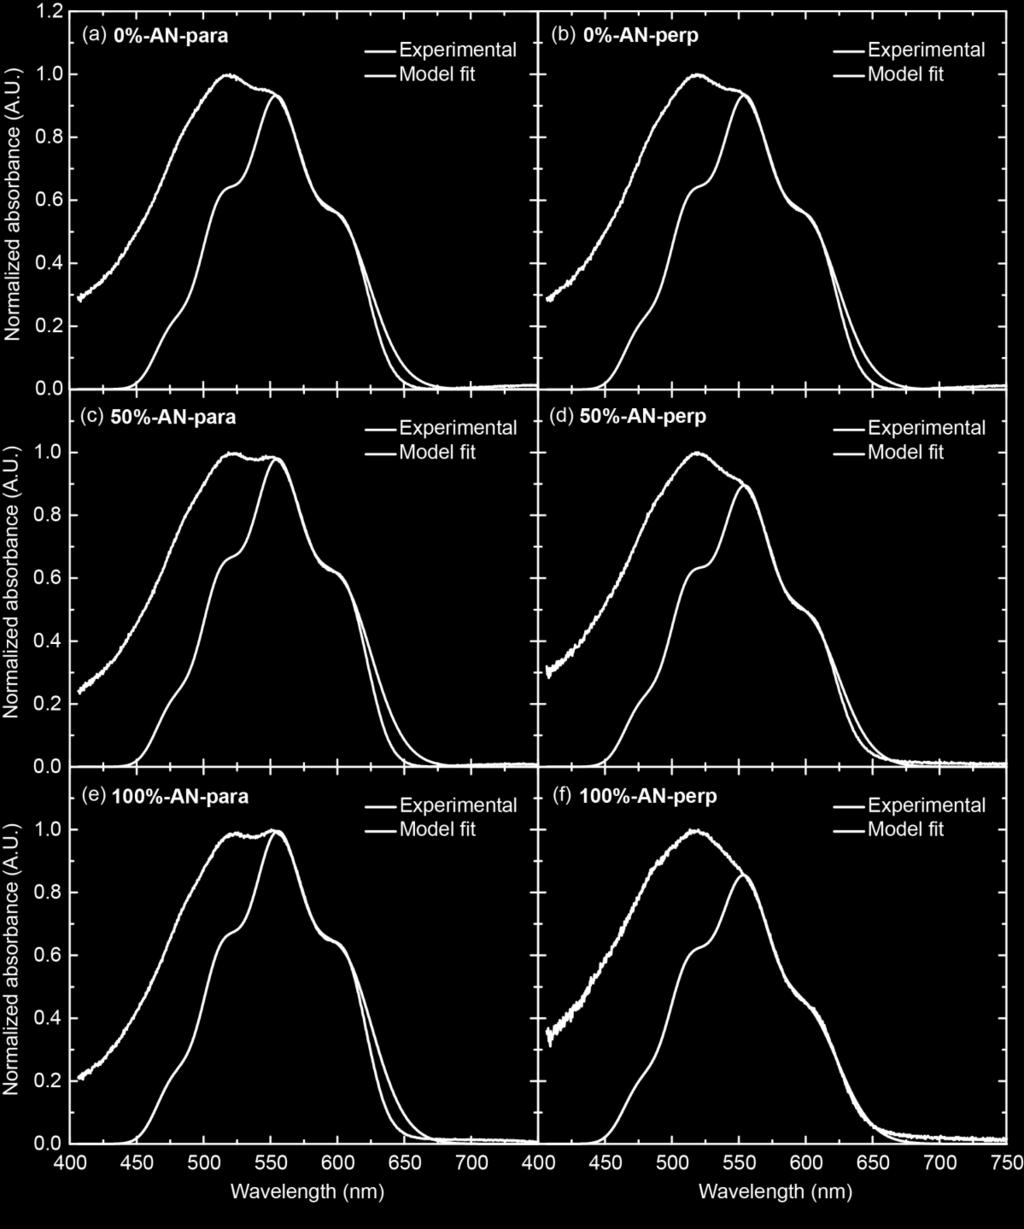 Figure 52 Normalized absorbance measurements for thermally annealed P3HT films measured using linear polarized light parallel and